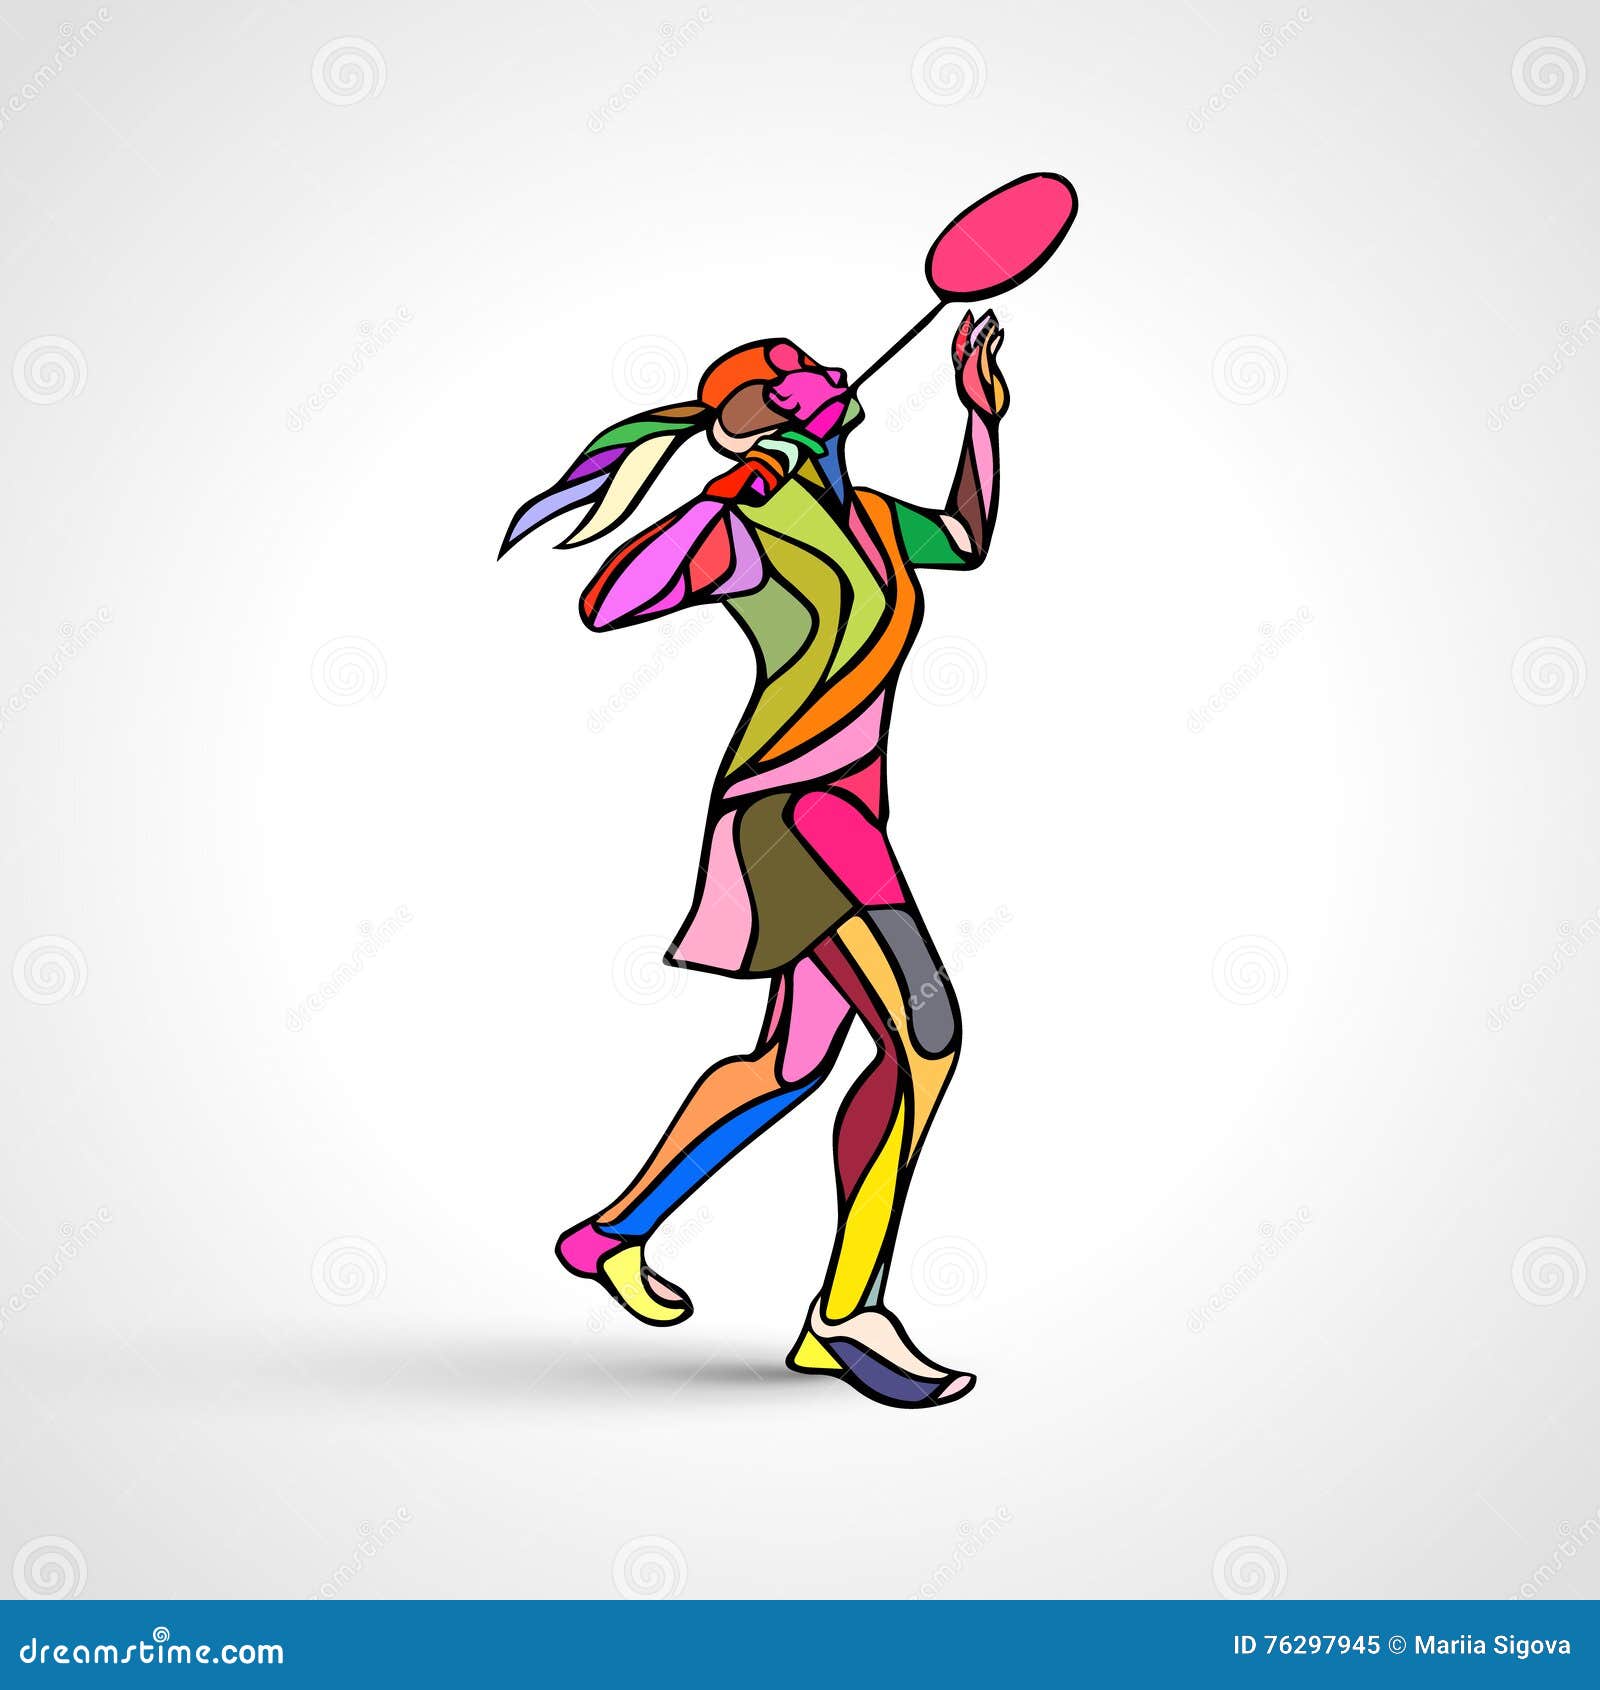 Creative Silhouette Of Abstract Female Badminton Player ...